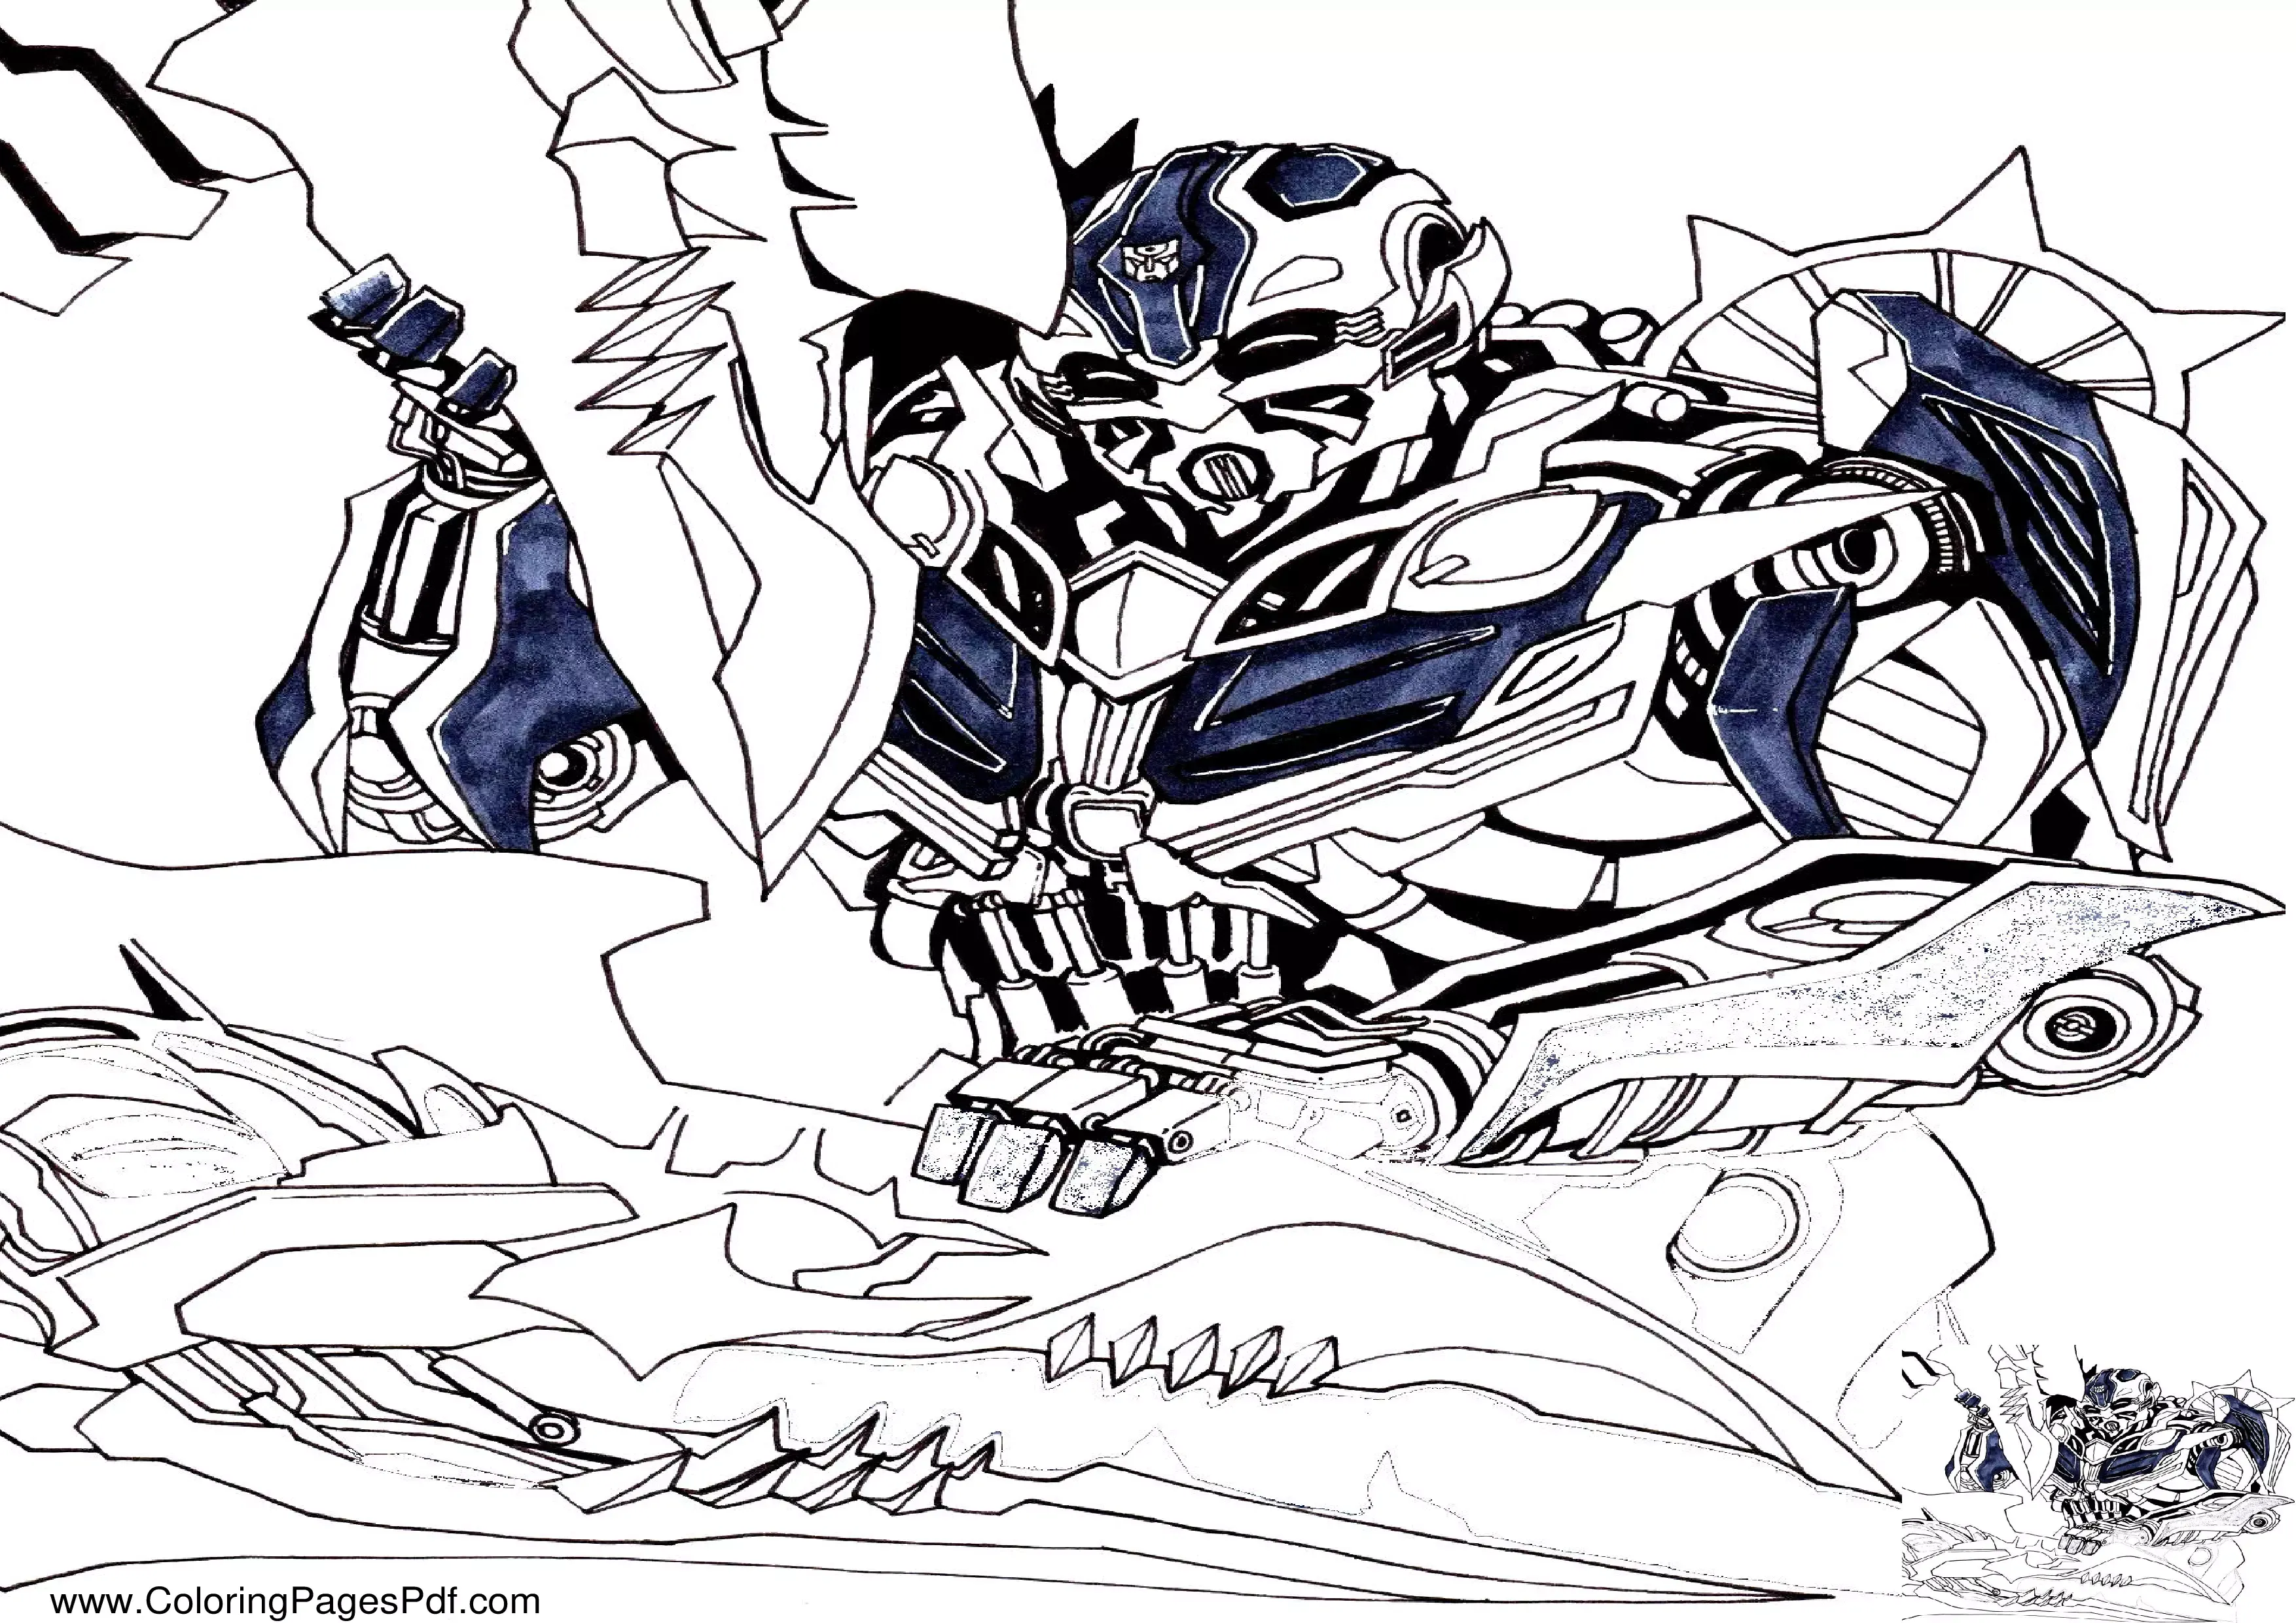 Transformers coloring pages pdf